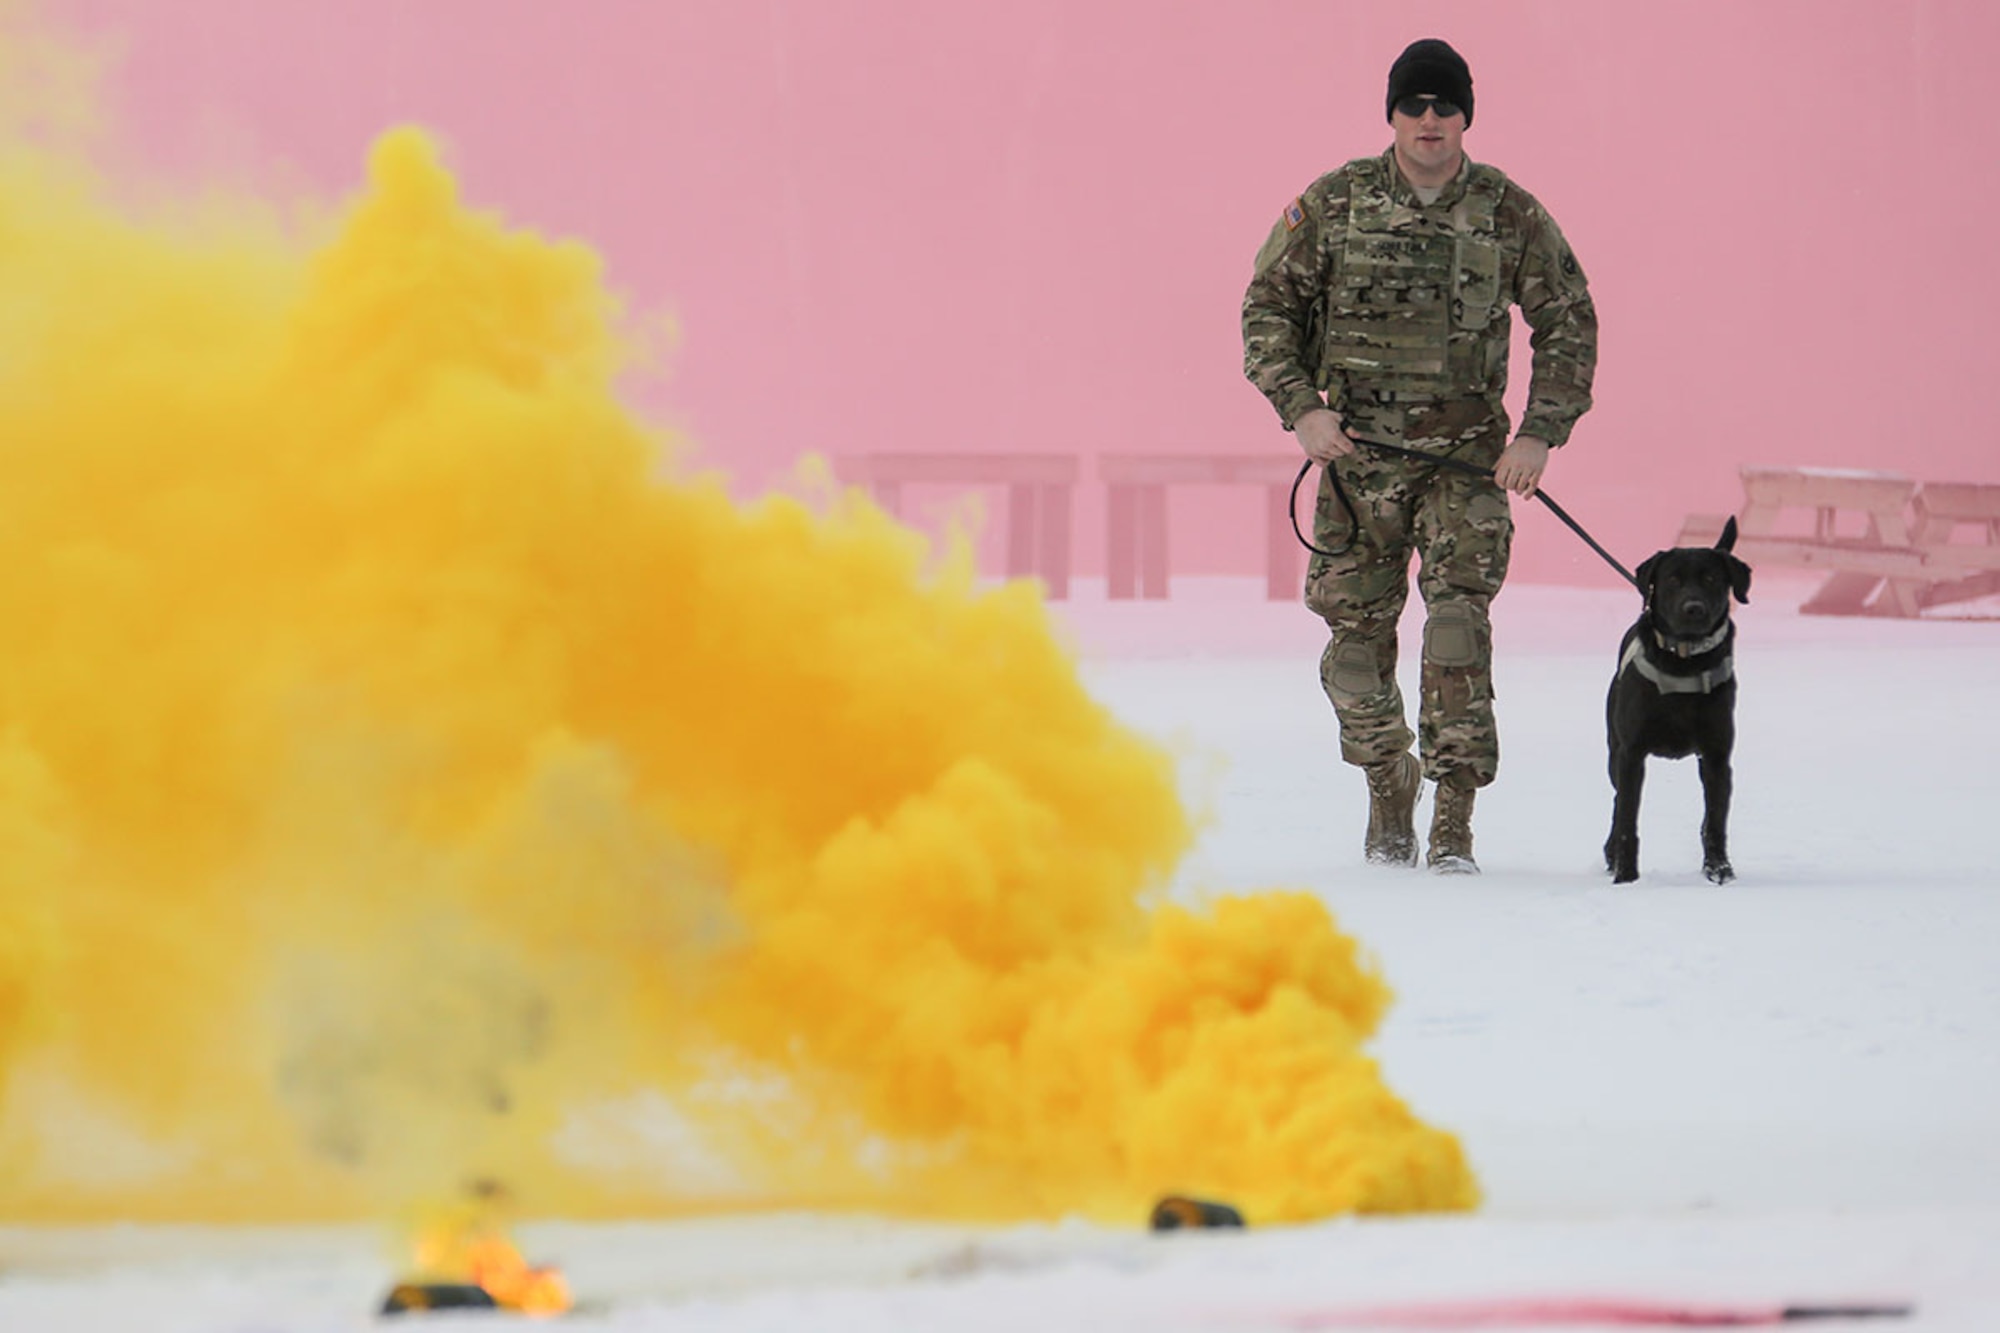 U.S. Army Spc. Jared Schultz and military working dog, Teddy, assigned to the 549th Military Working Dog Detachment, conduct K-9 training at Joint Base Elmendorf-Richardson, Alaska, March 17, 2016. The Army military working dog handlers conducted the K-9 training with their Air Force counterparts, assigned to the 673d Security Forces Squadron, to keep their teams flexible to respond to law enforcement emergencies and for overseas deployments. (U.S. Air Force photo/Alejandro Peña)